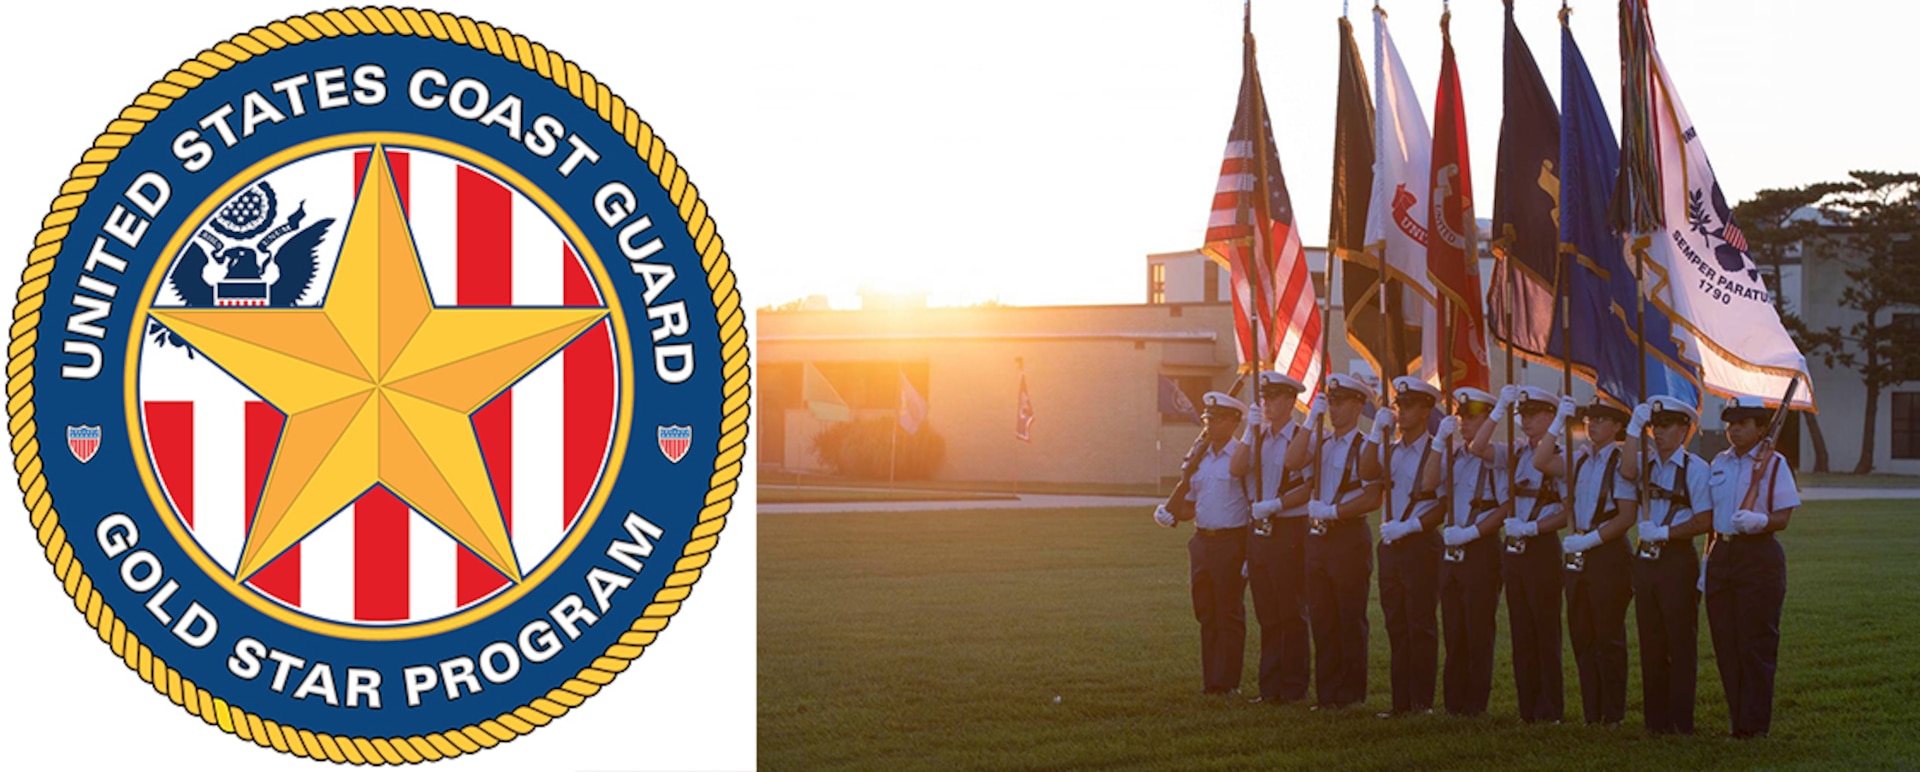 Coast Guard Training Center Cape May to hold Gold Star Memorial Day